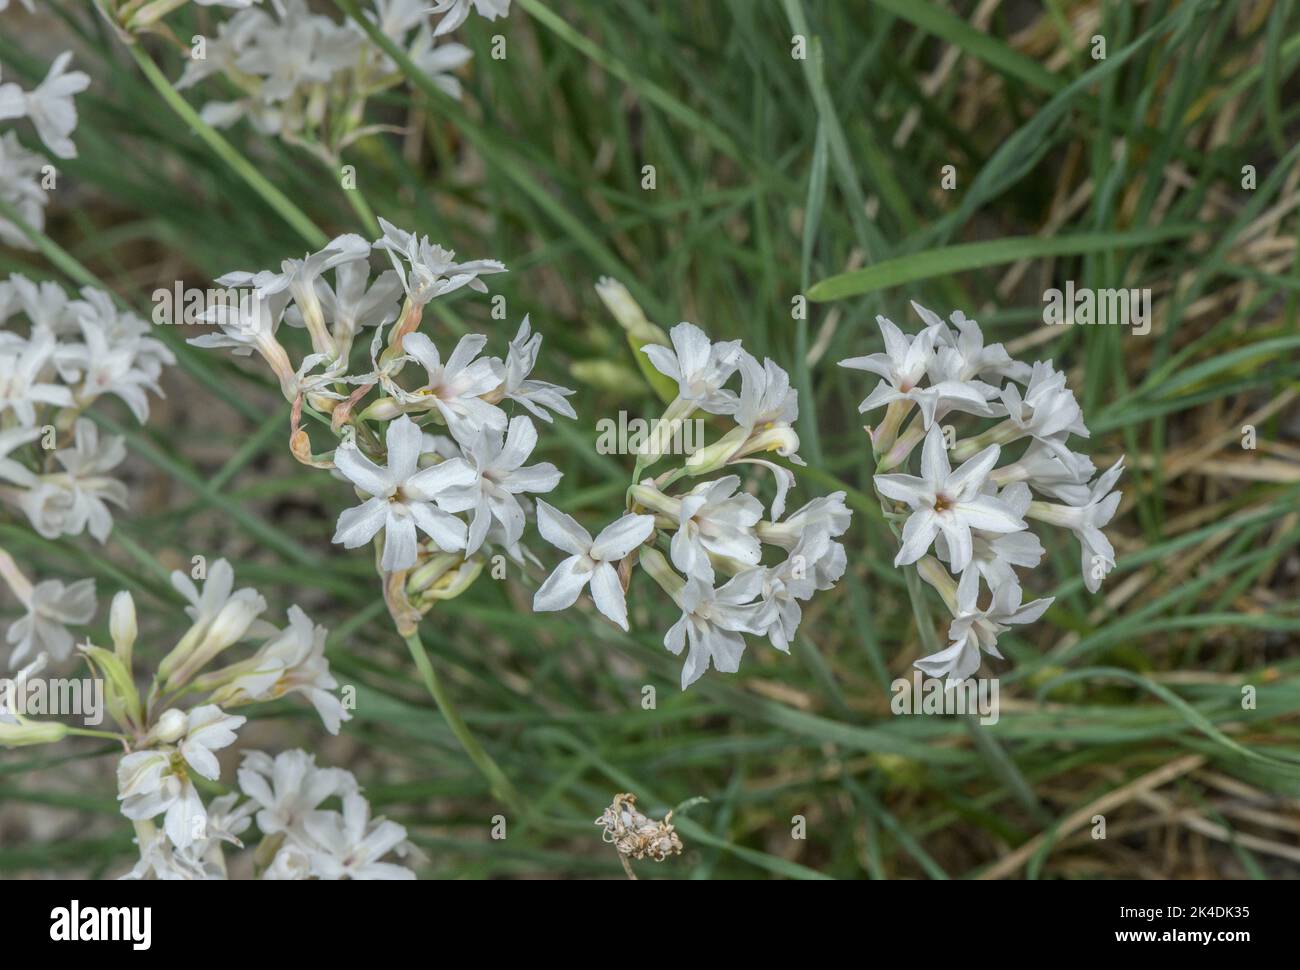 Tulbaghia cominsii in flower. South Africa. Stock Photo